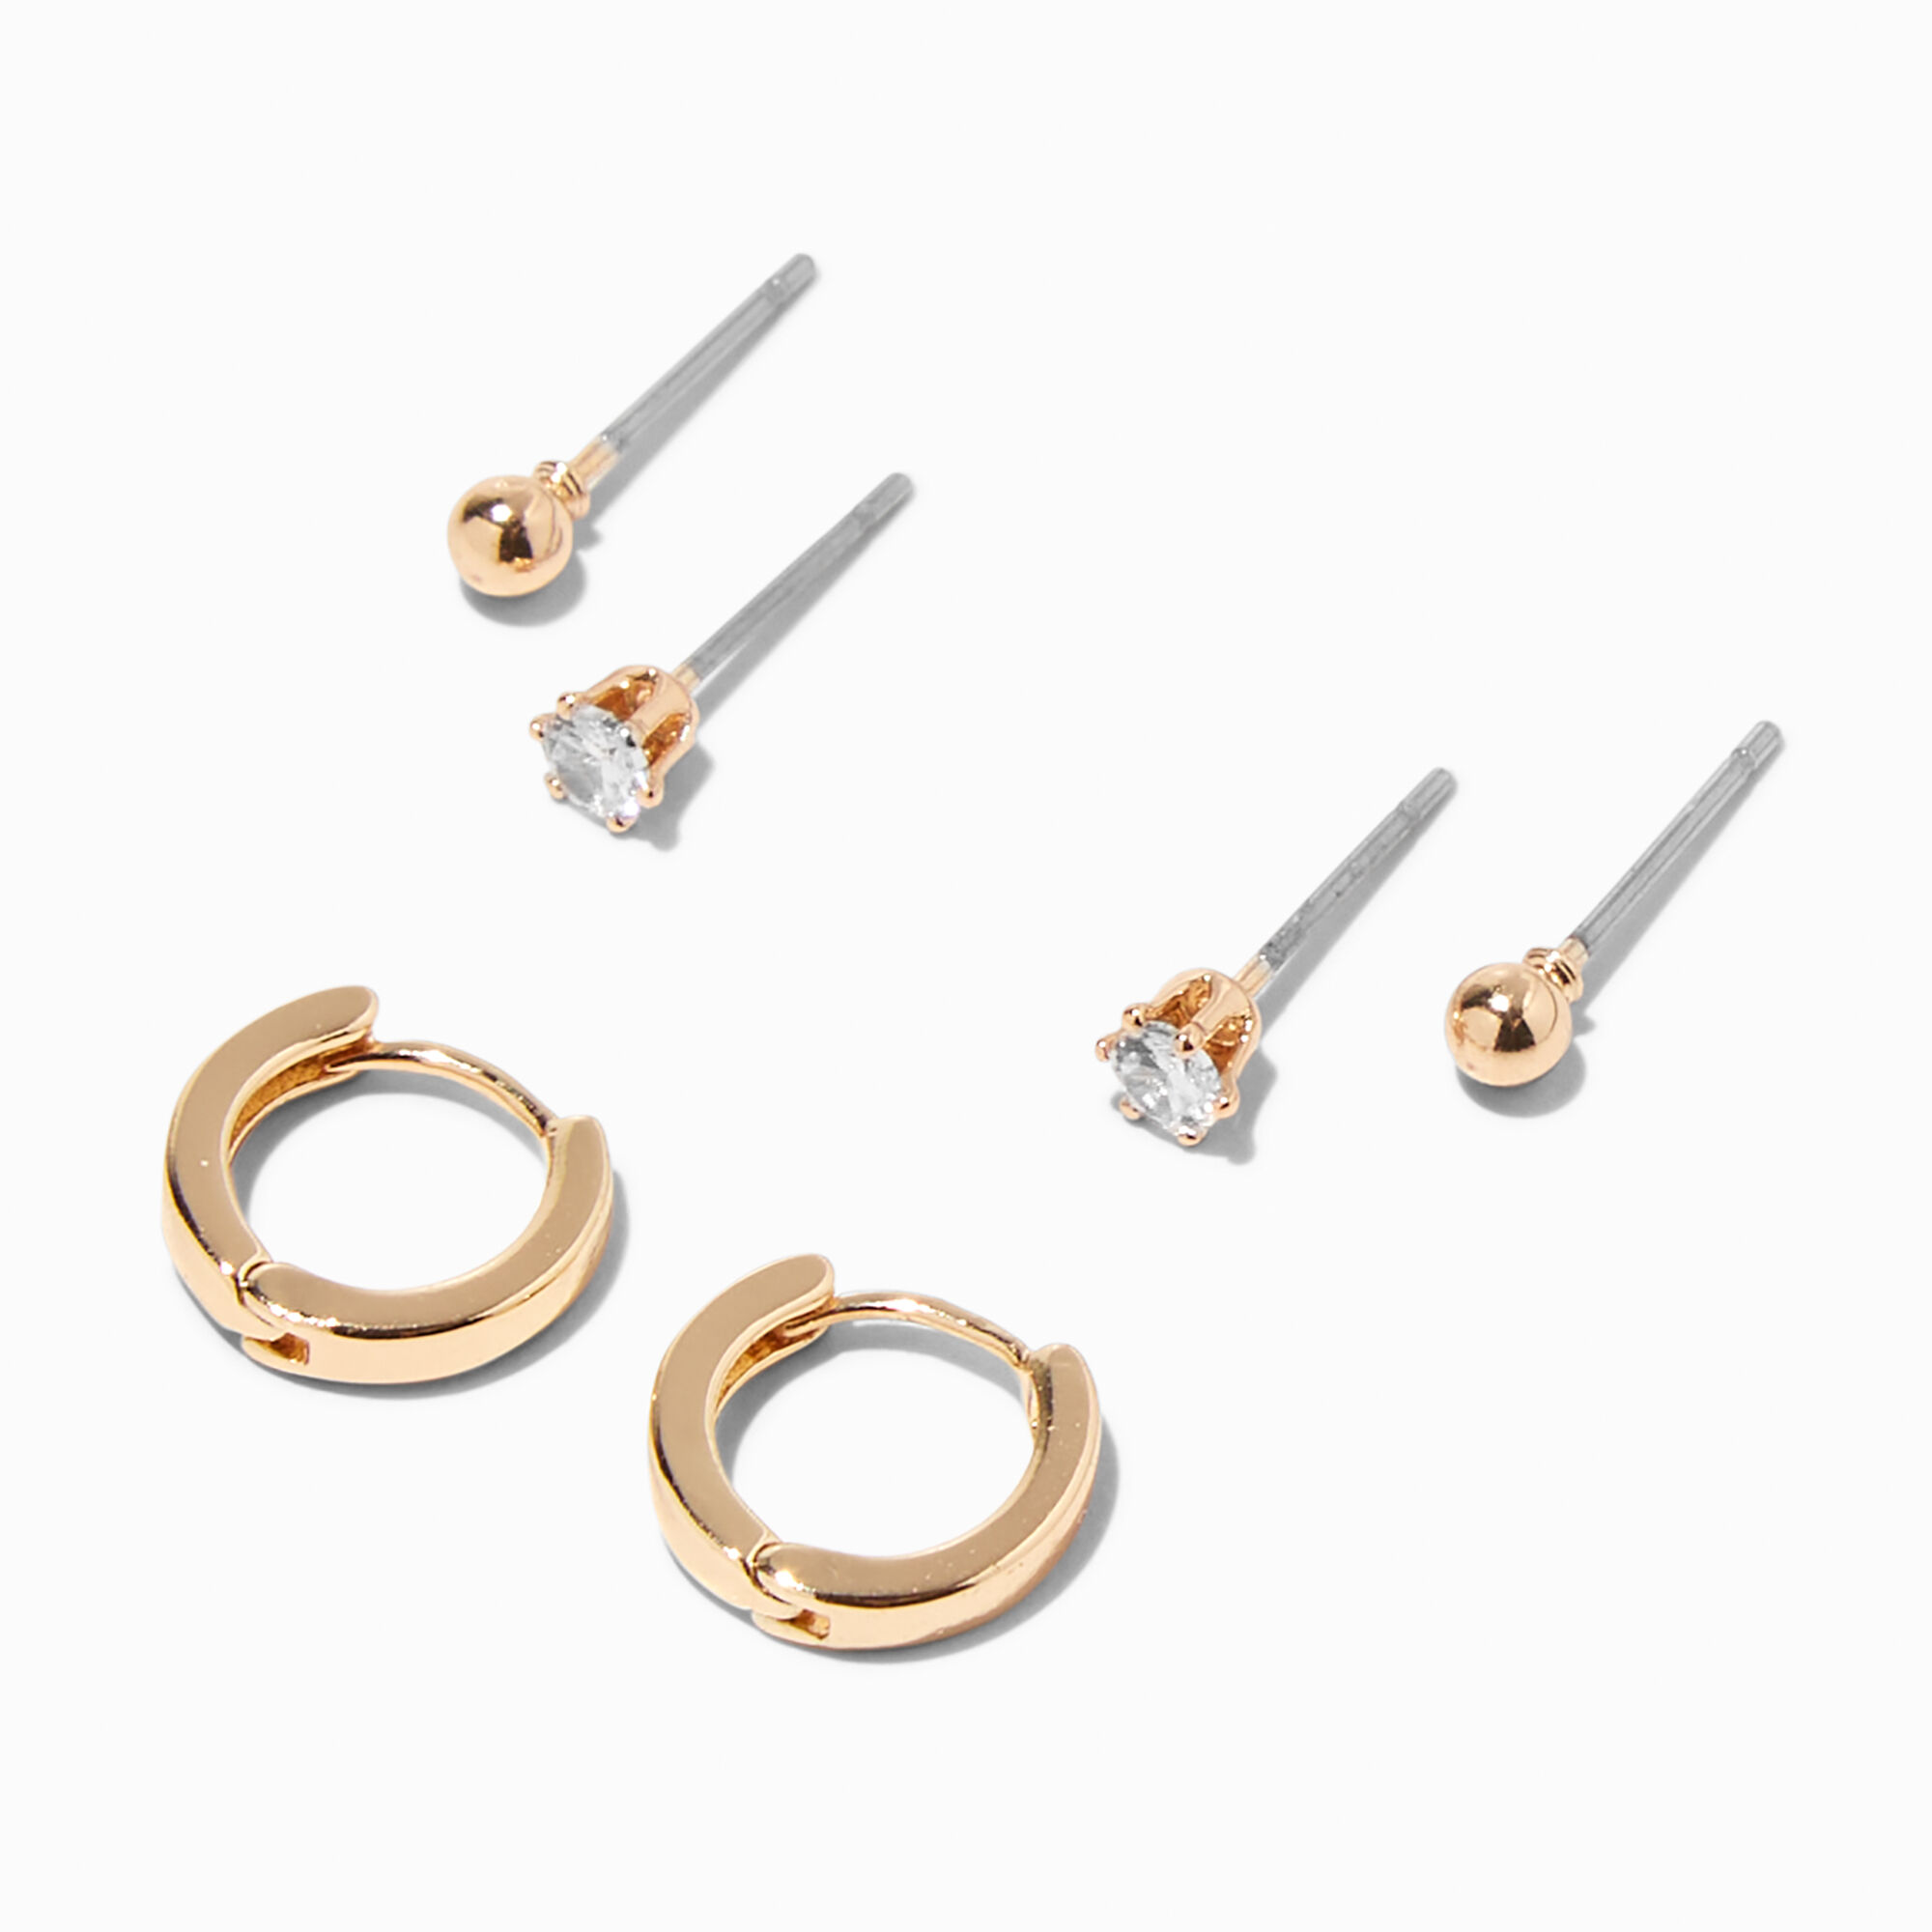 View Claires Tone Earring Stackables Set 3 Pack Gold information